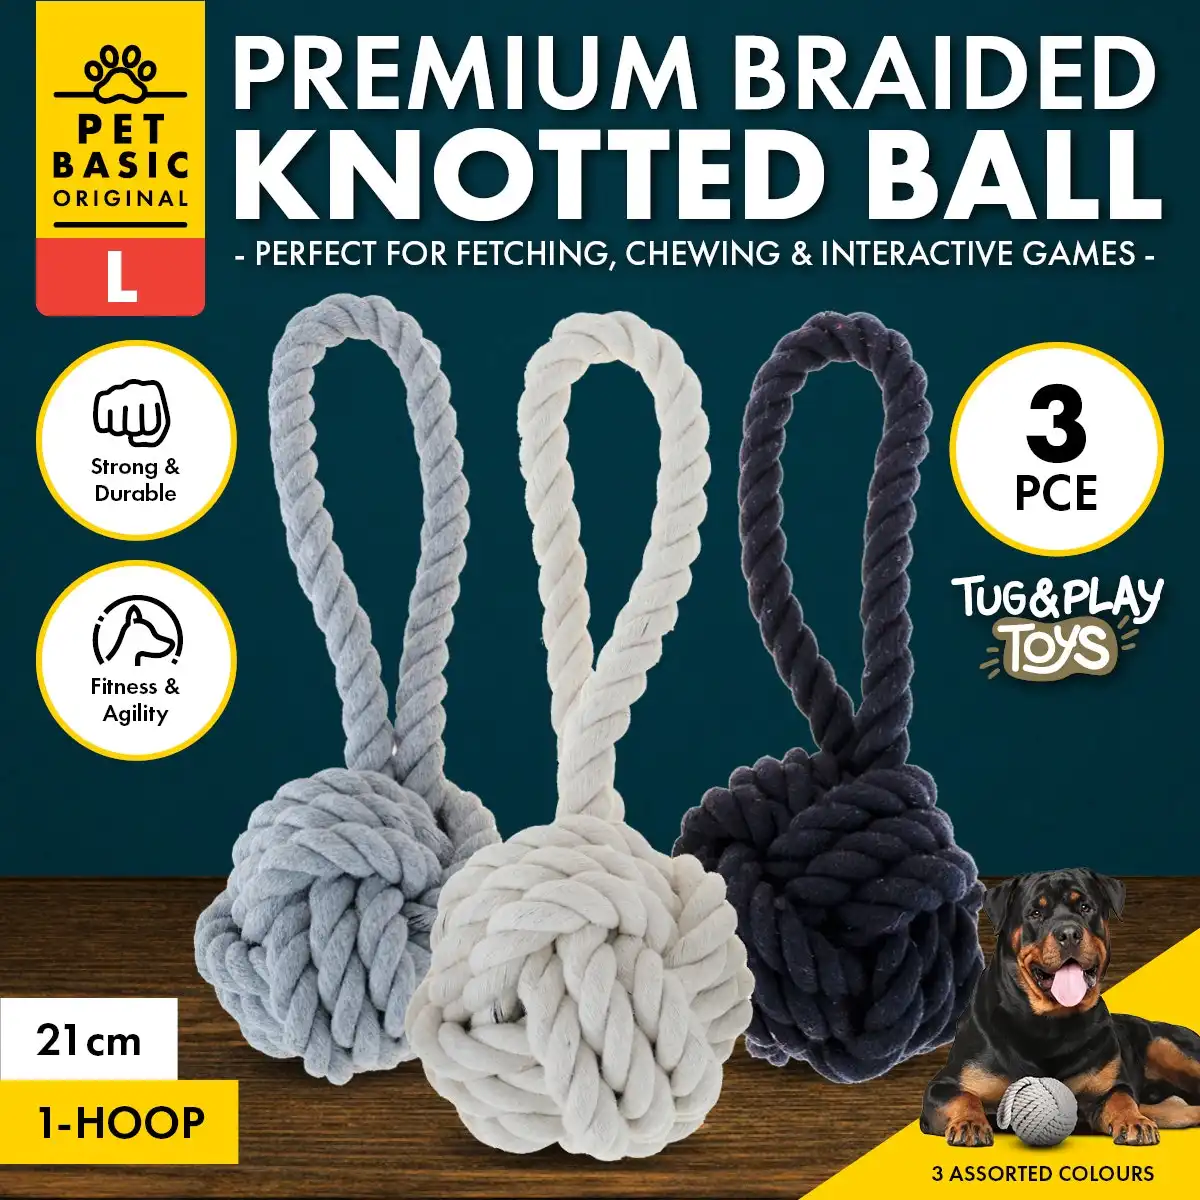 Pet Basic® 3PCE Premium Braided Rope Knotted Ball Large Natural Fibres 21cm